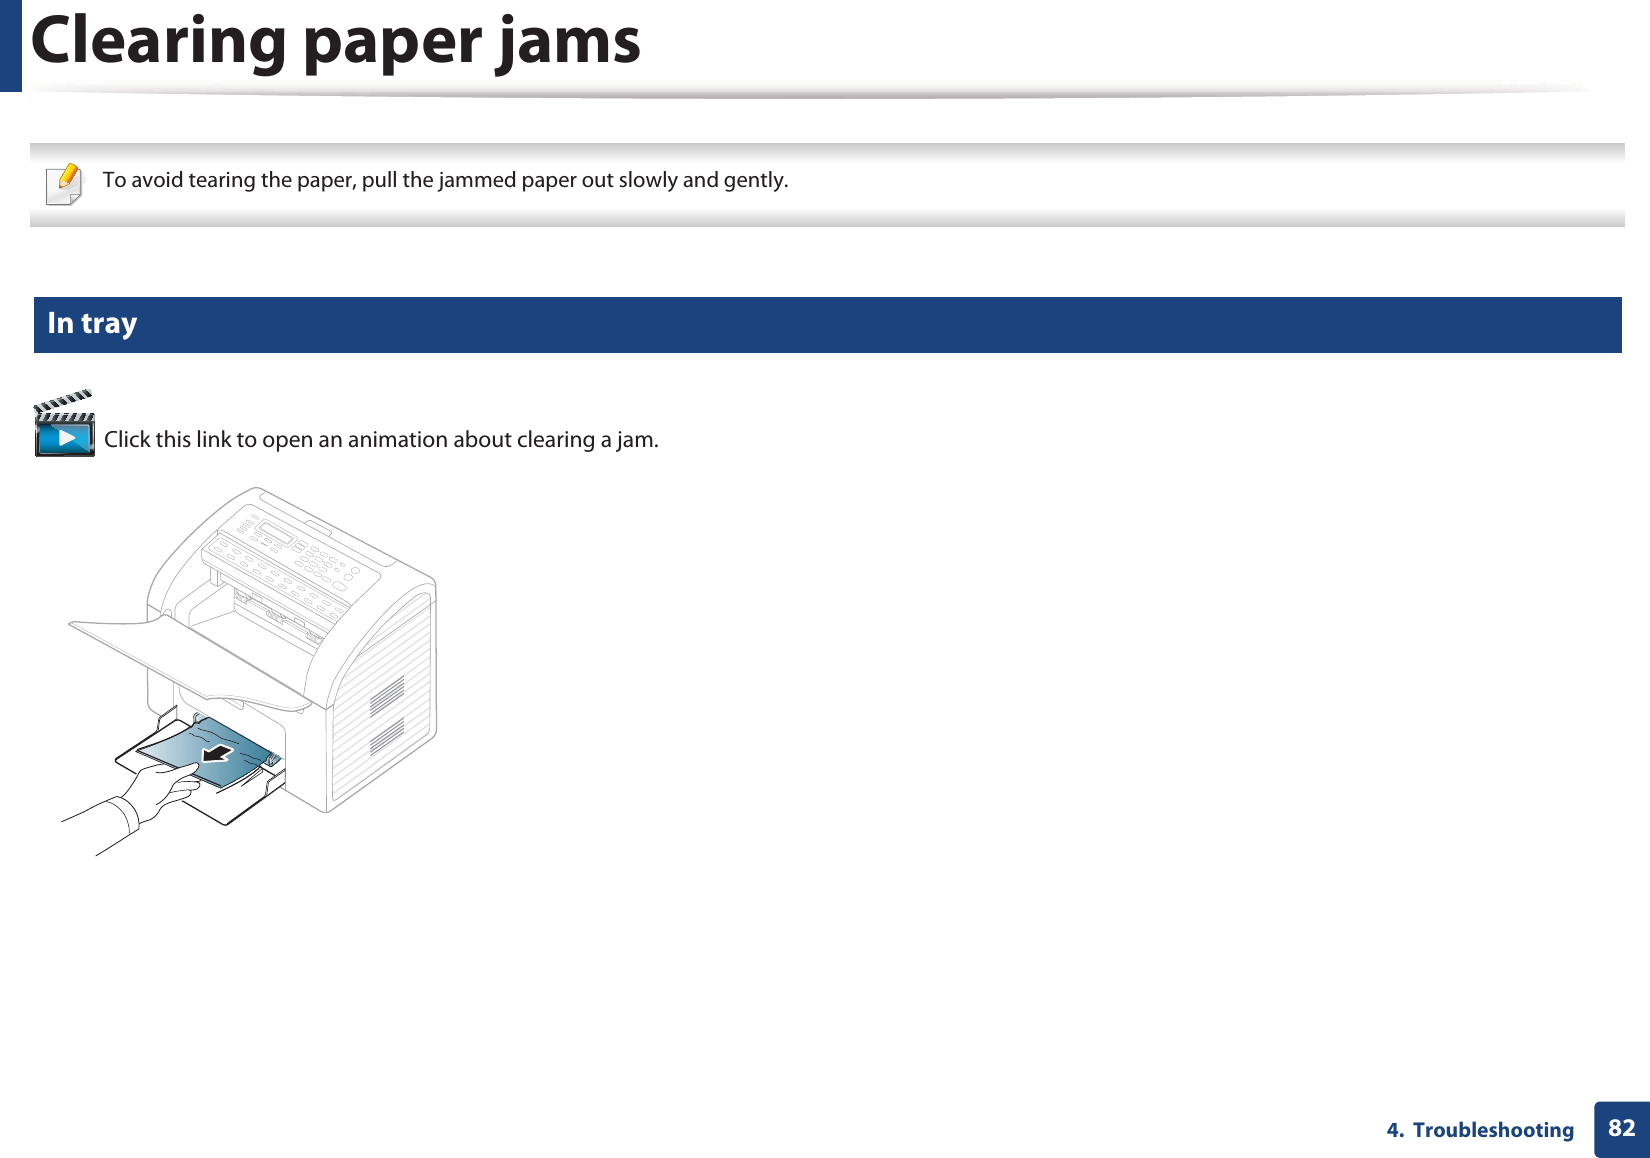 824.  TroubleshootingClearing paper jams To avoid tearing the paper, pull the jammed paper out slowly and gently.  3 In tray Click this link to open an animation about clearing a jam.